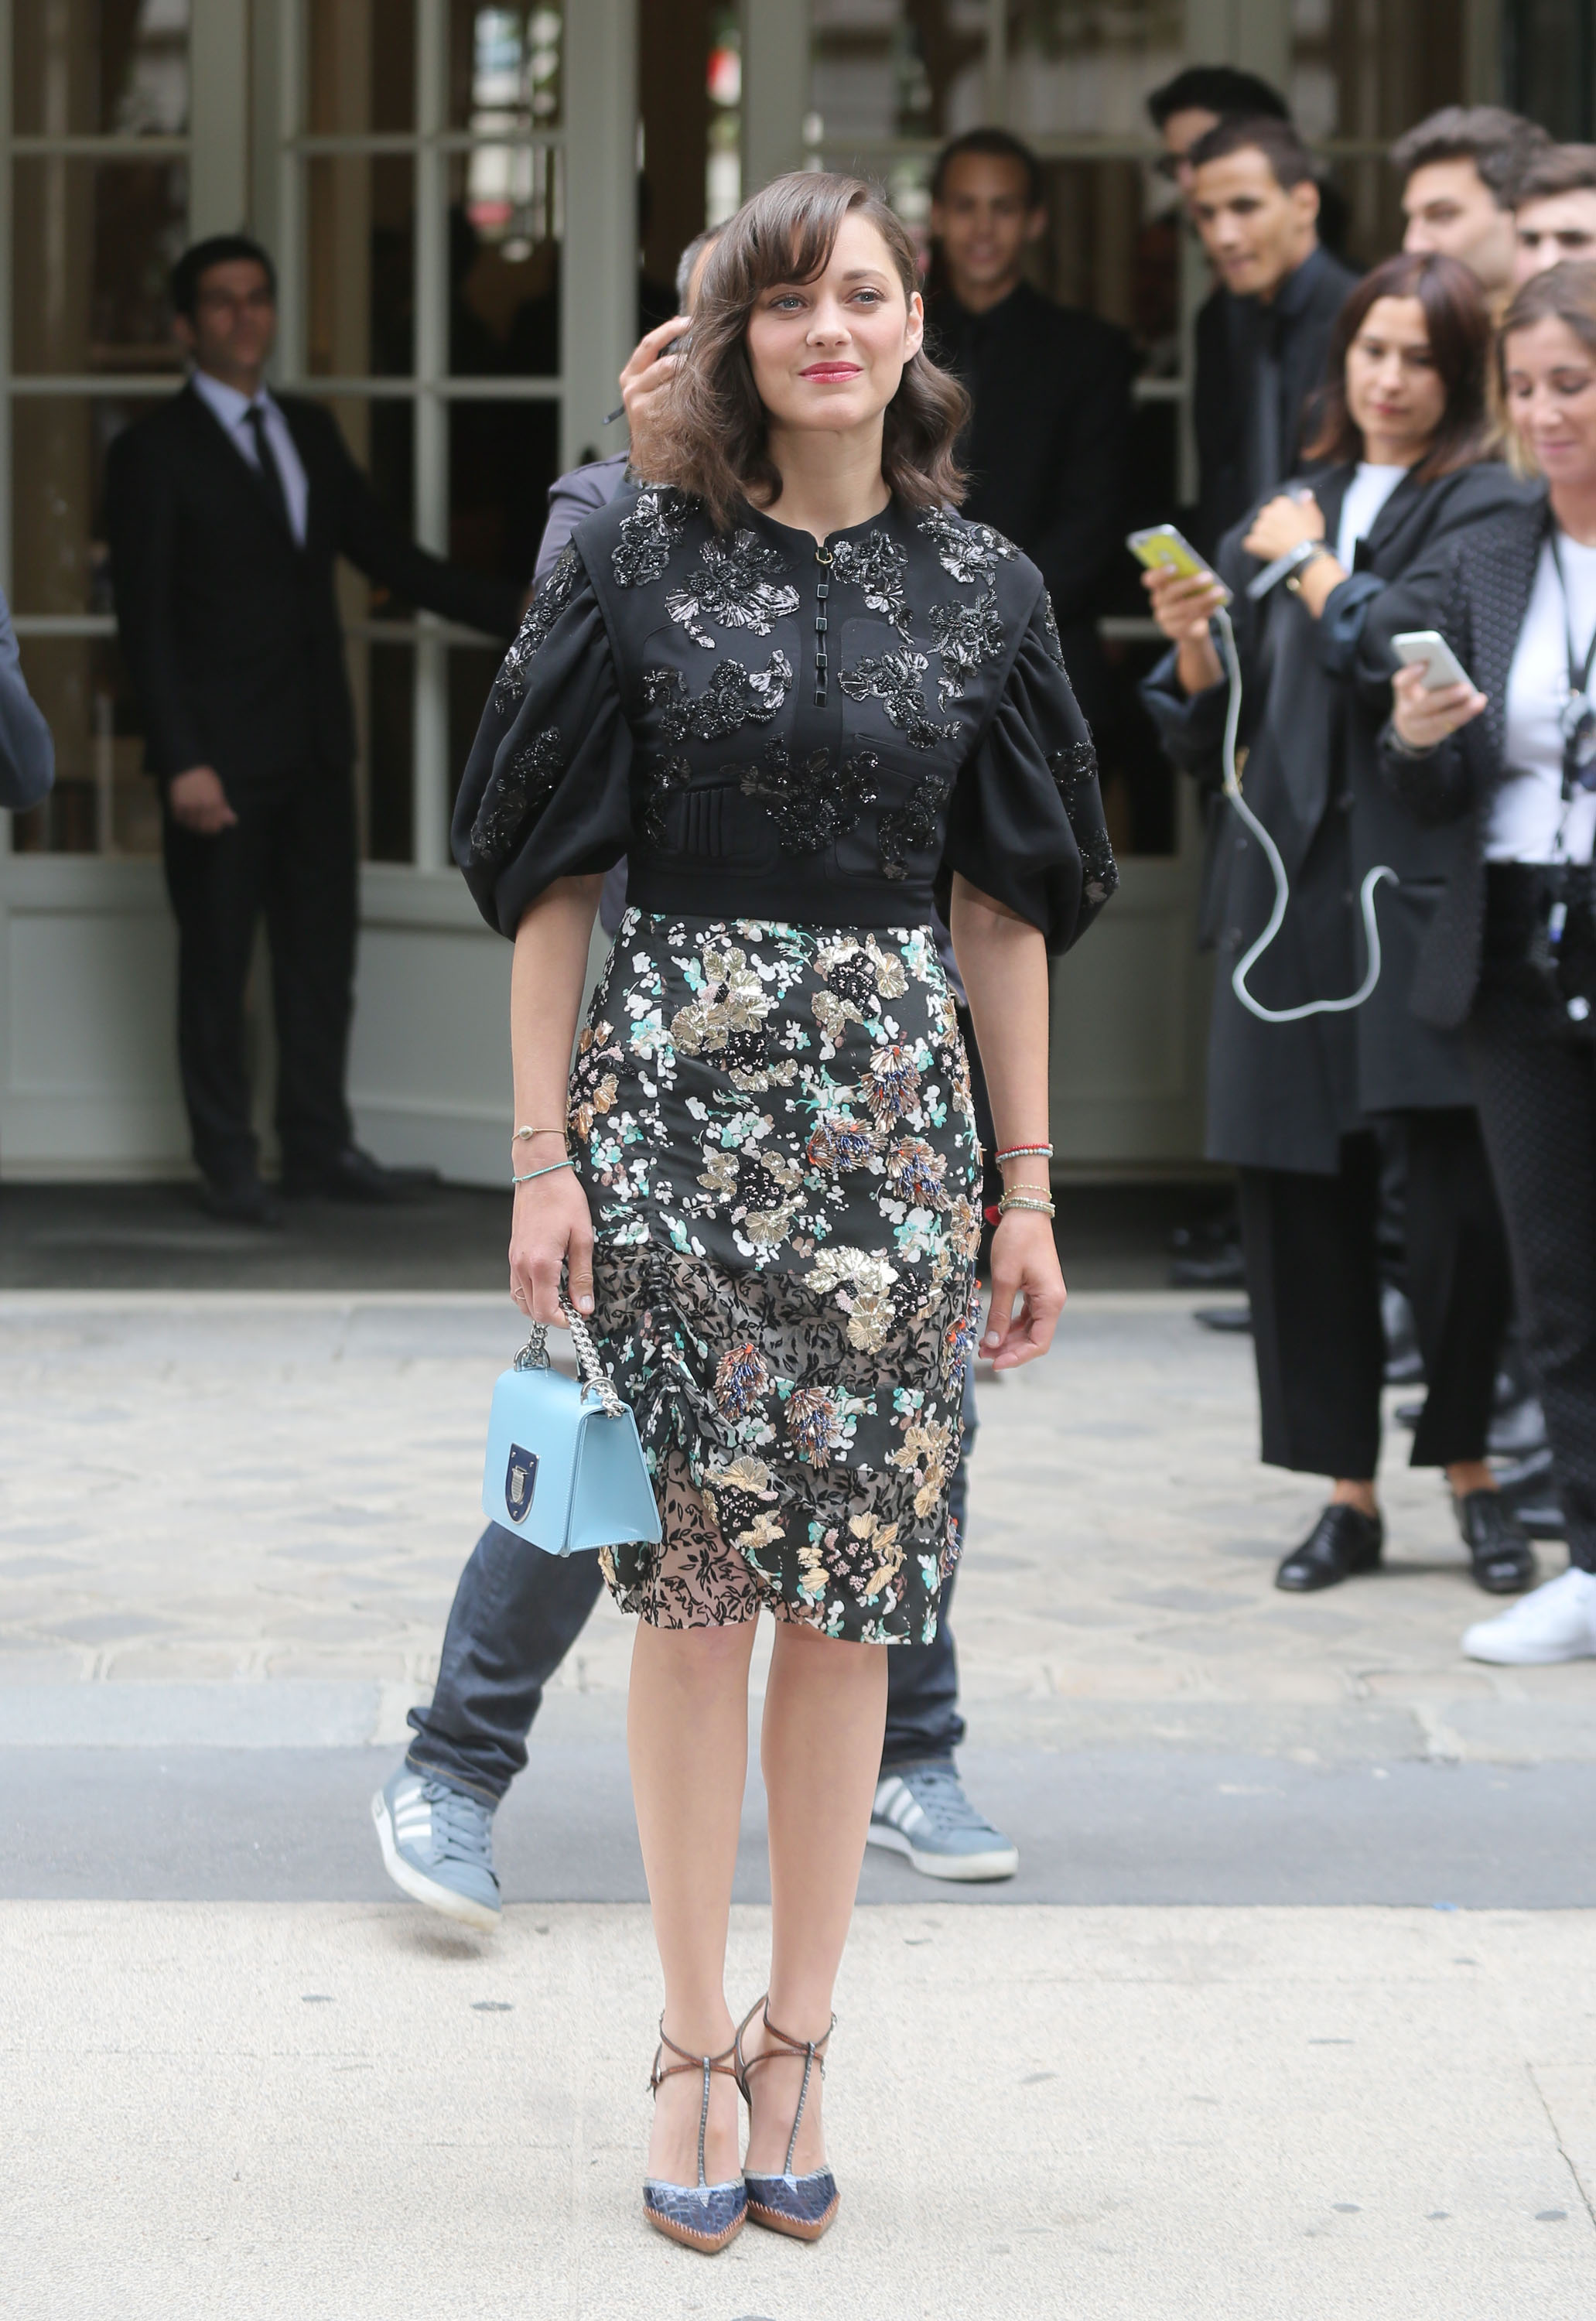 Fugs and Fabs: Celebs at the Dior Haute Couture Show